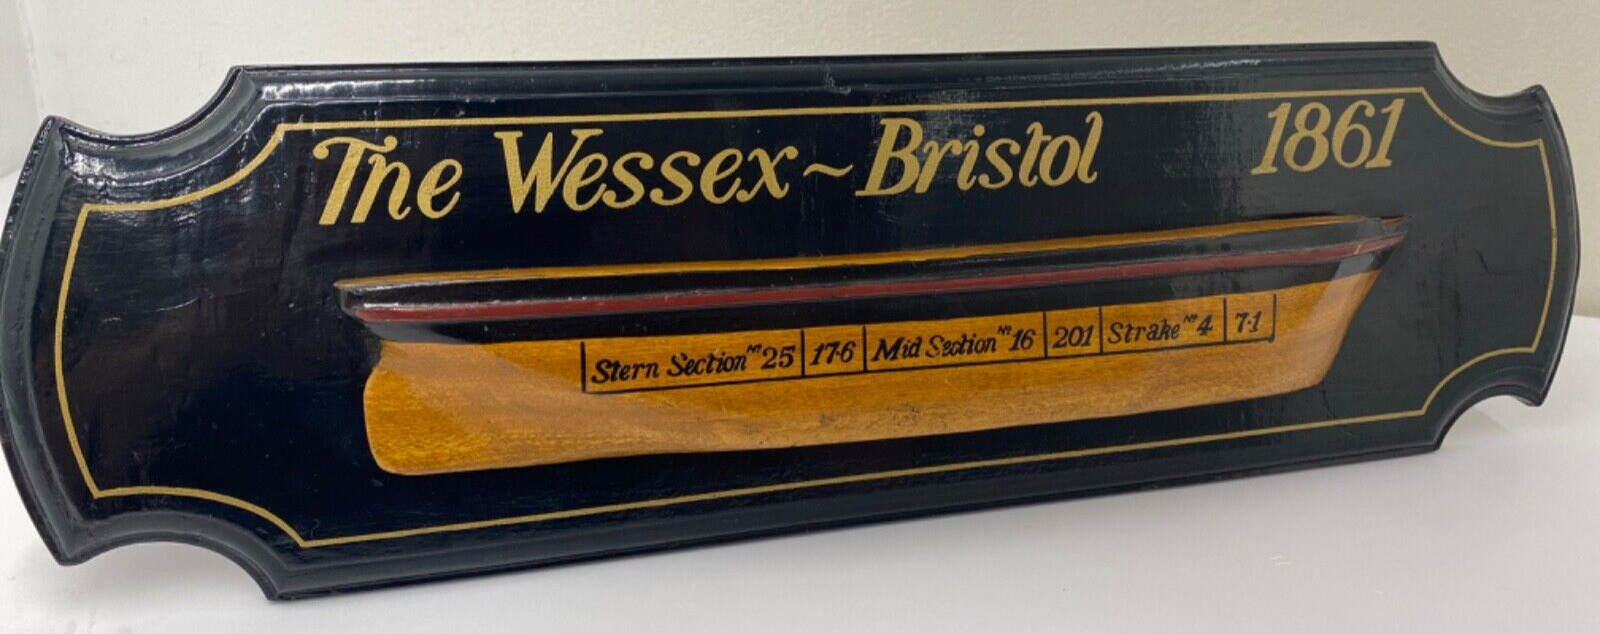 Rare Vintage The Wessex-Bristol 1861 Nautical Wall Décor Wood Royal Navy Model